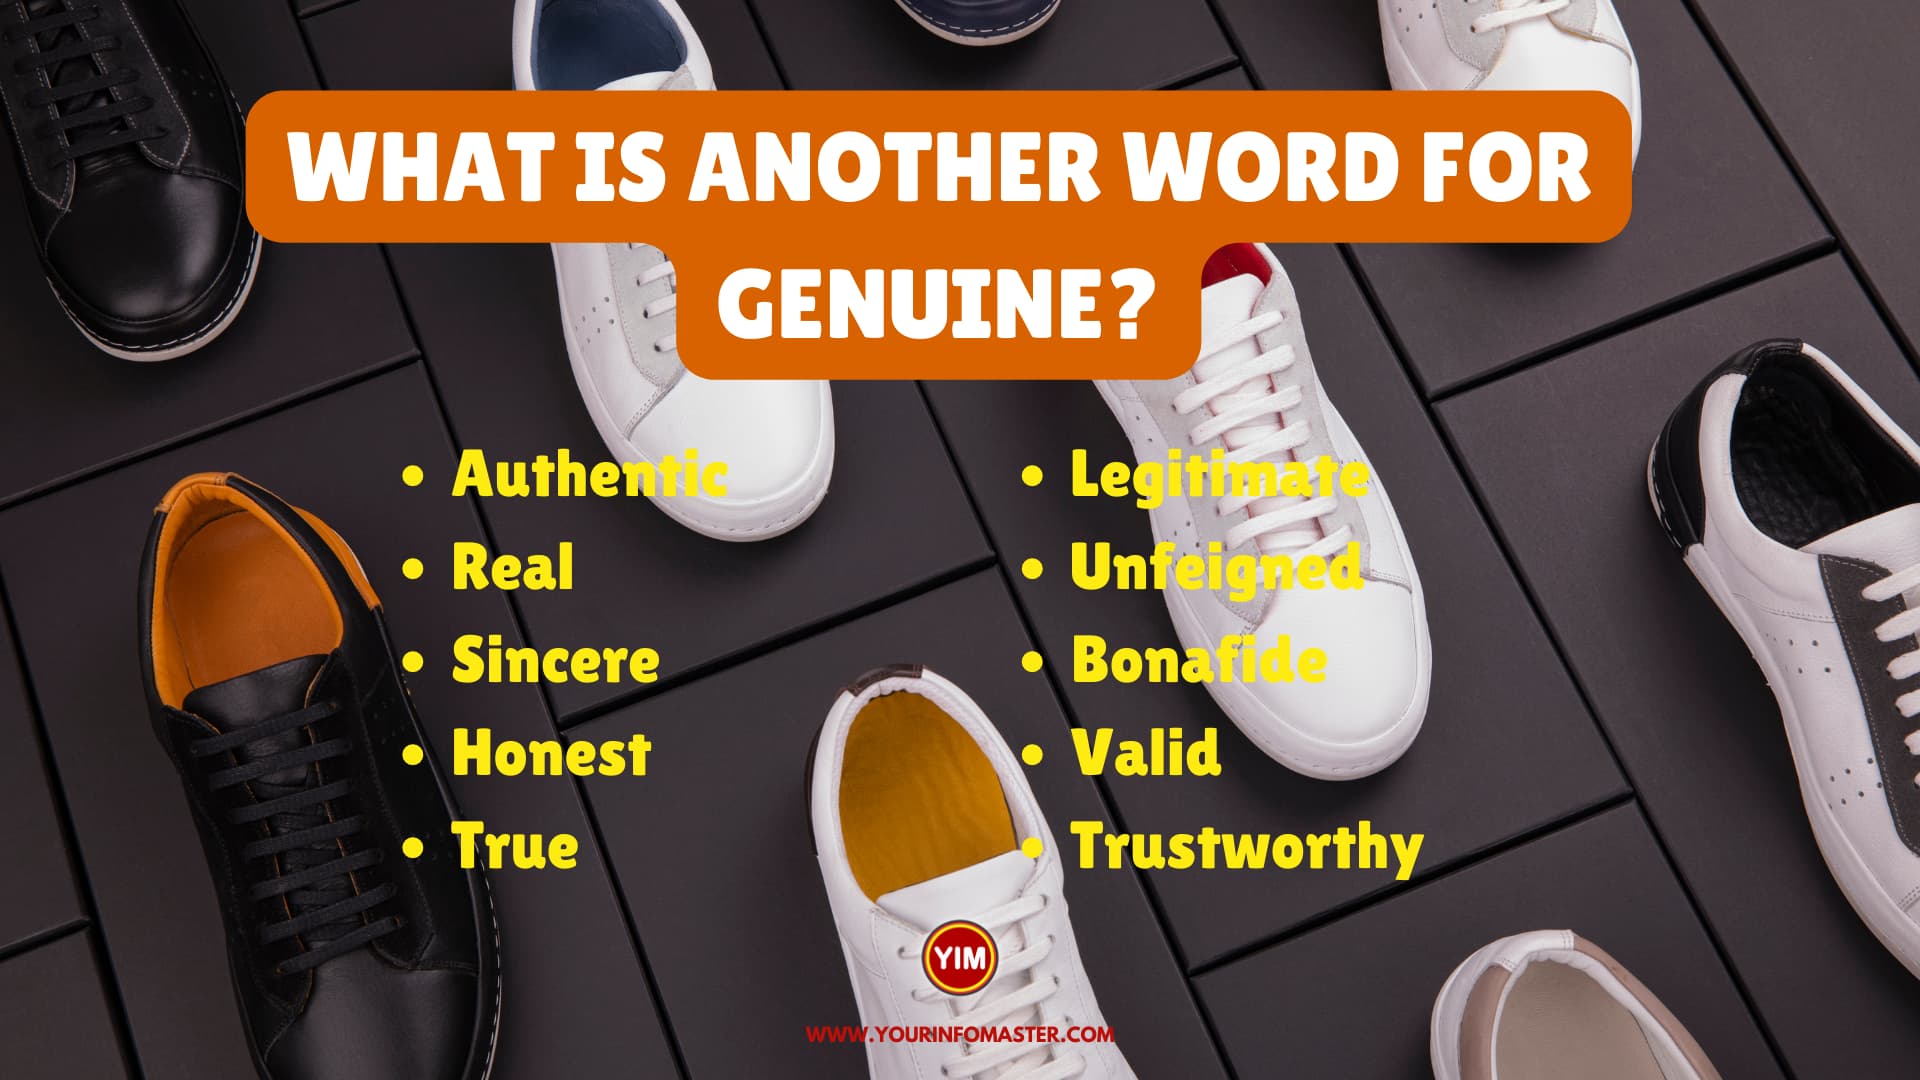 What is another word for Genuine